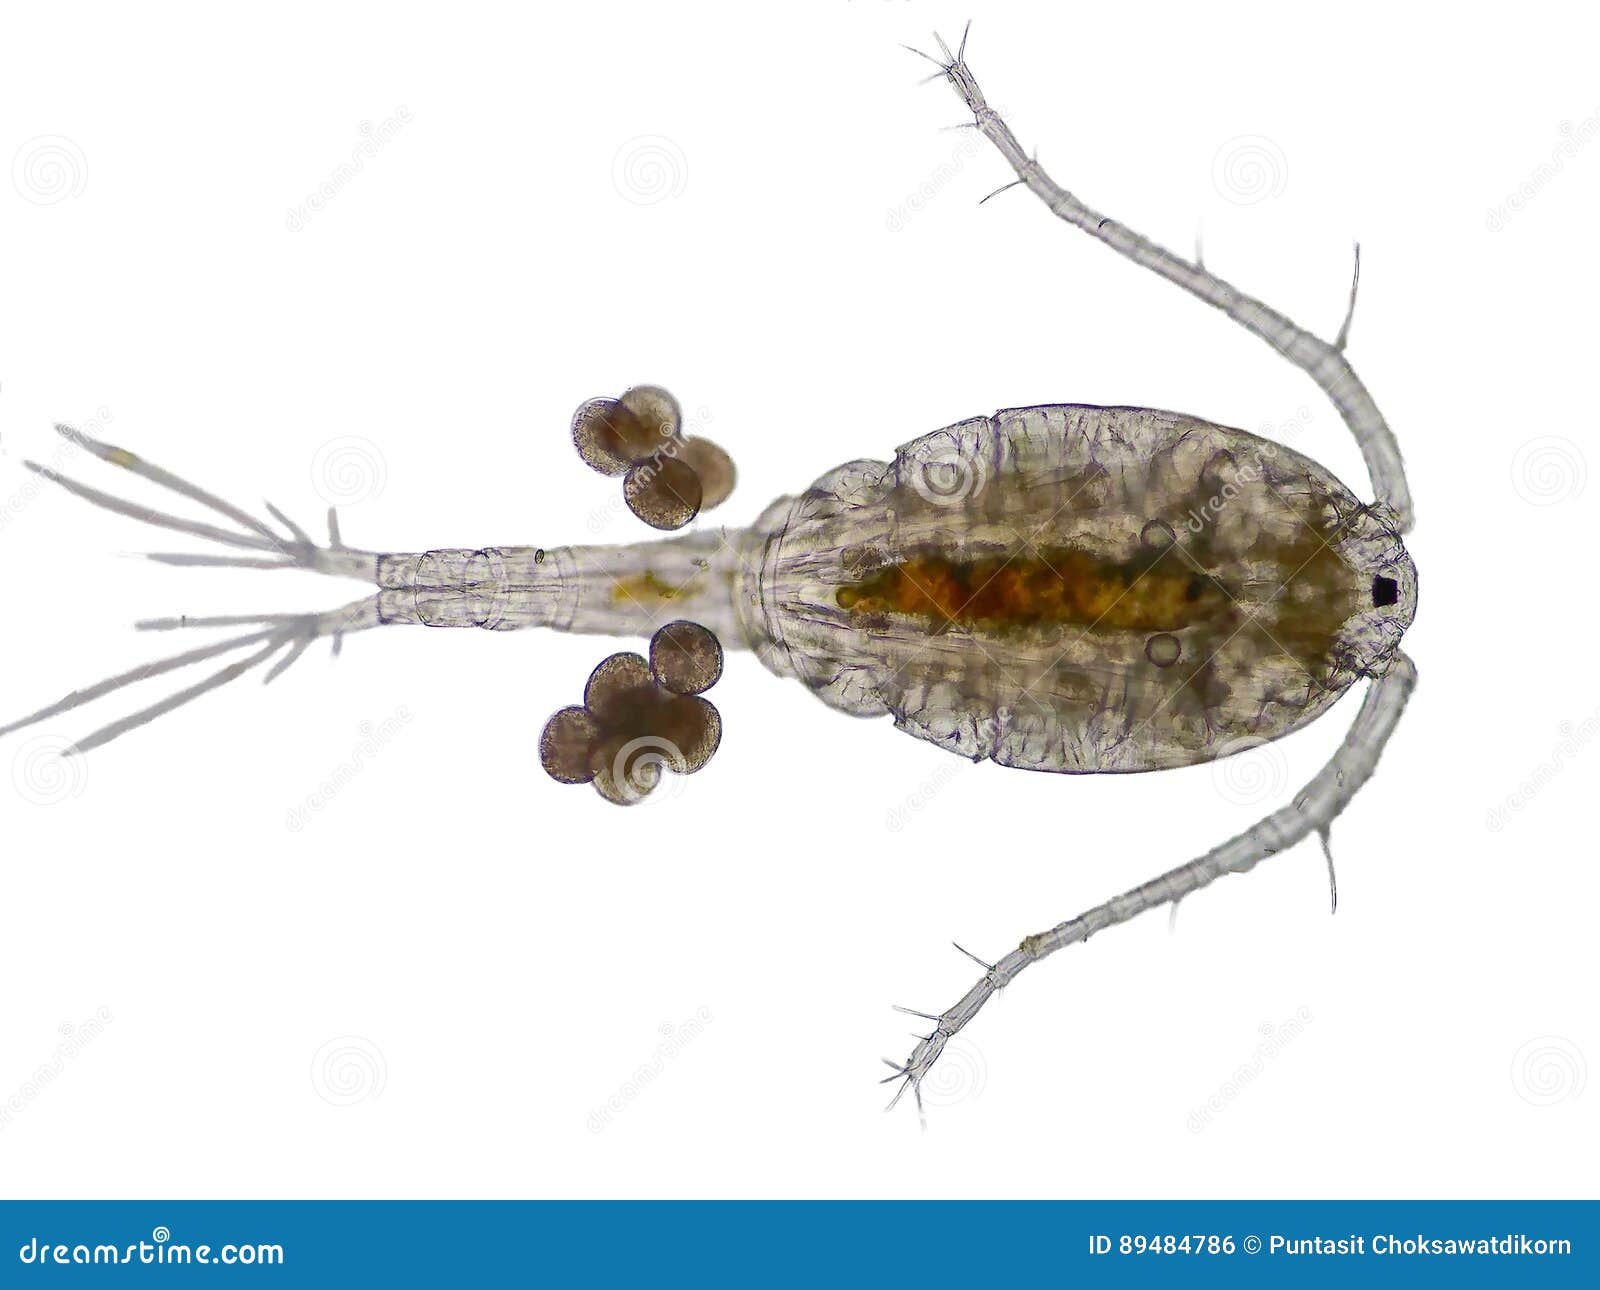 copepod zooplankton are a group of small crustaceans